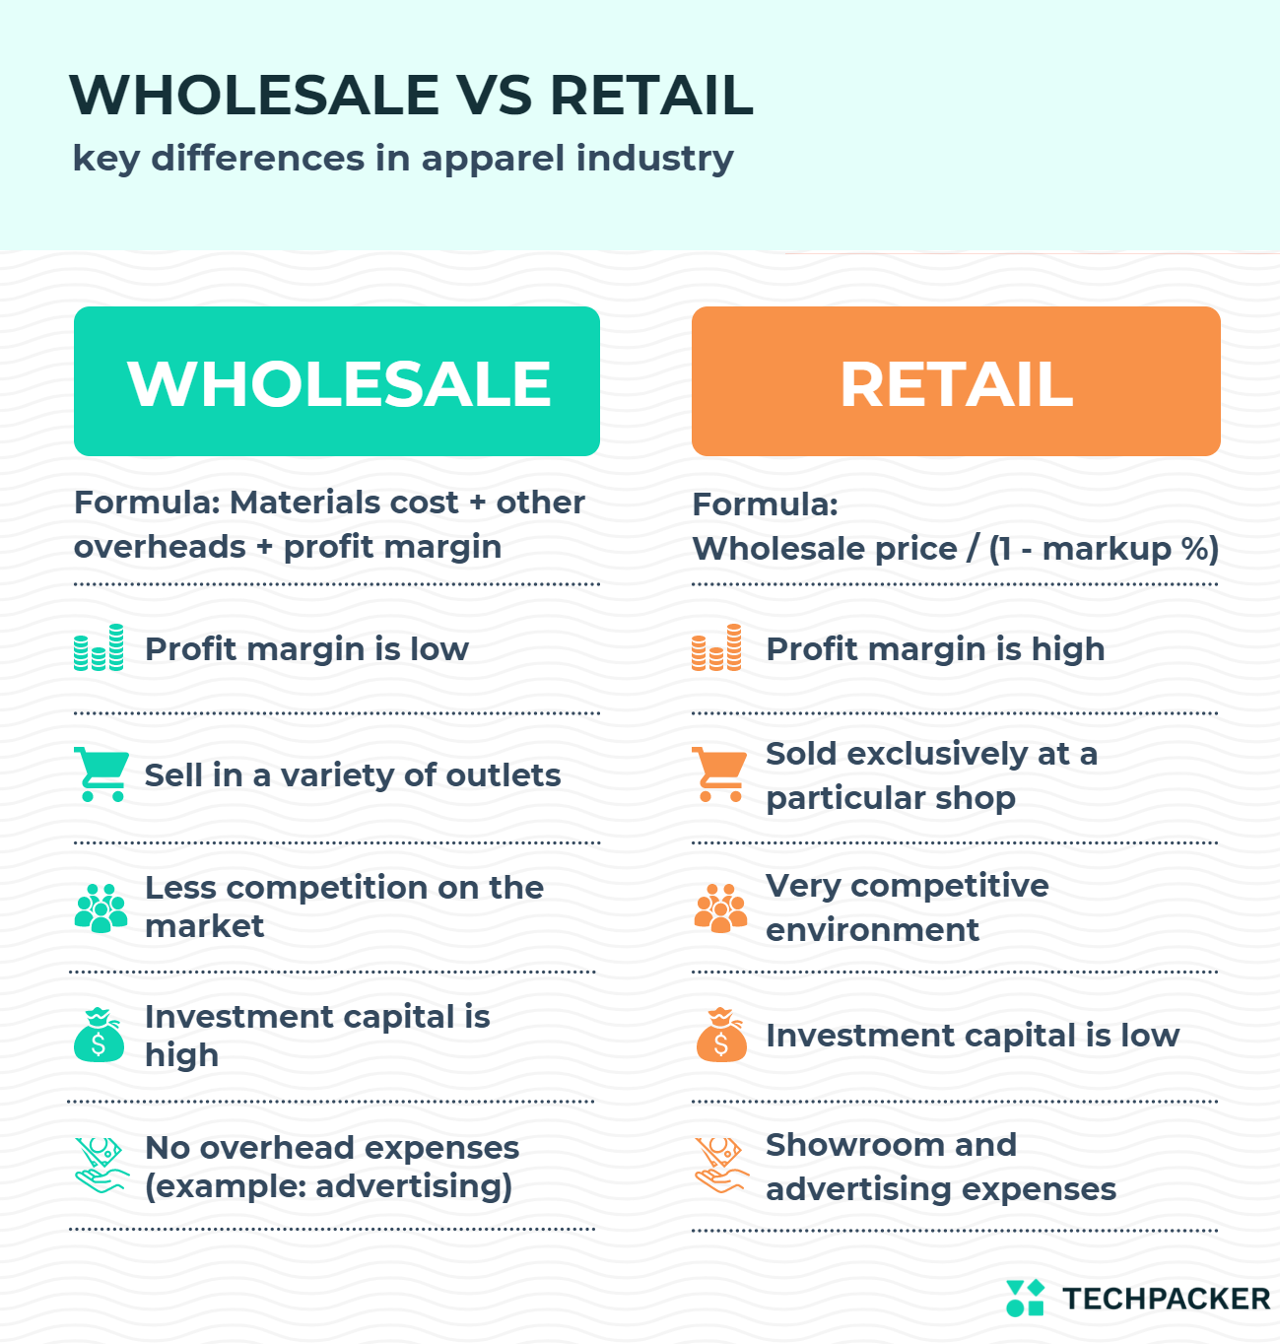 Difference Between Retail and Wholesale In Apparel Industry